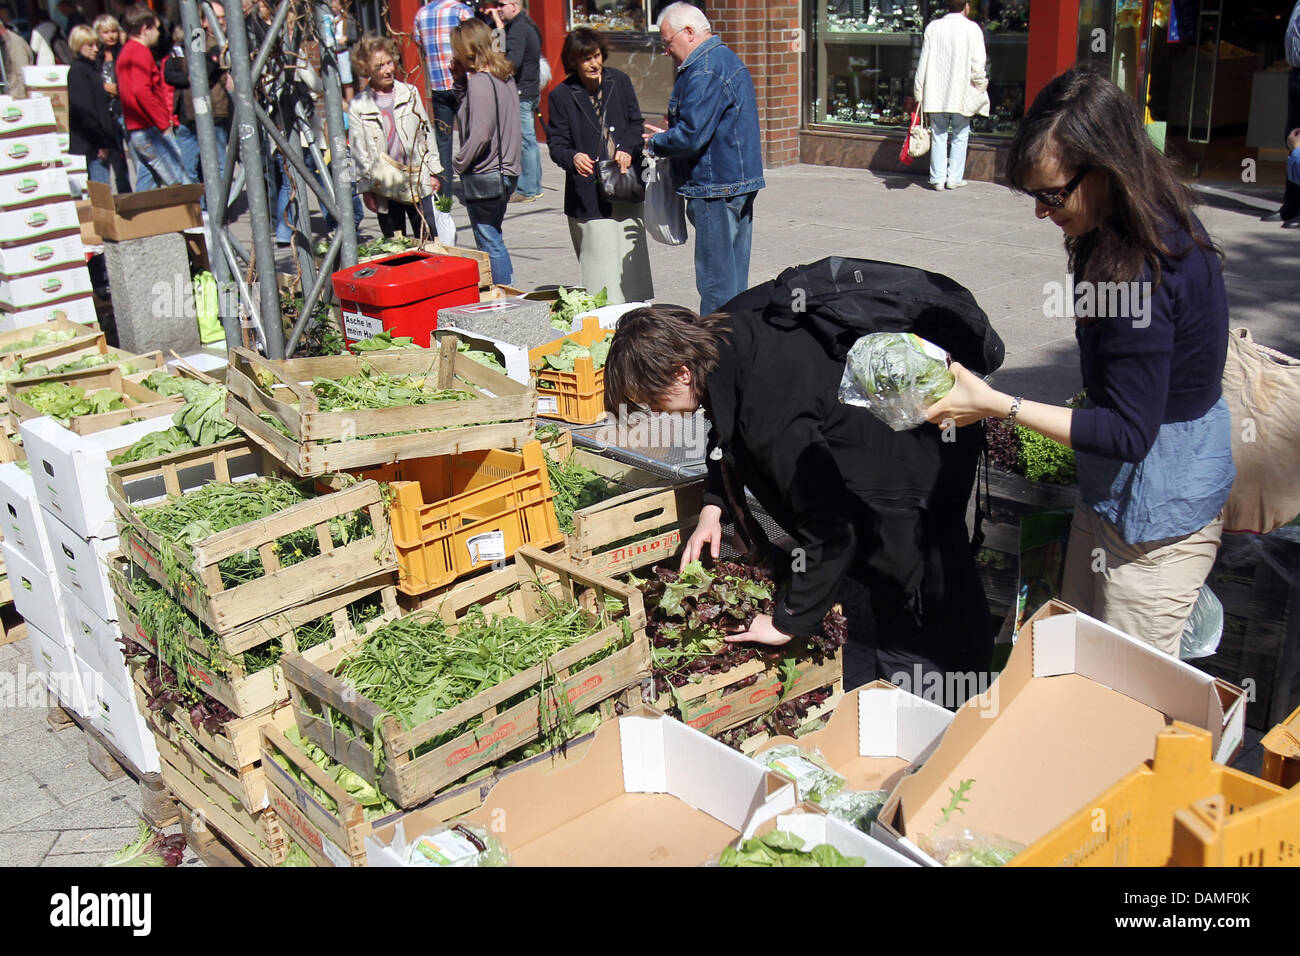 People take vegetables from boxes in the street as famers give away vegetables as presents in the city centre of Hamburg, Germany, 10 June 2011. With the motto 'Our vegetables are clean and harmless' the farmers and salespeople wish to point to the devastating situation they are in, since the EHEC bacteria has spread. Current warnings regarding the consumption of raw tomatoes, cucu Stock Photo